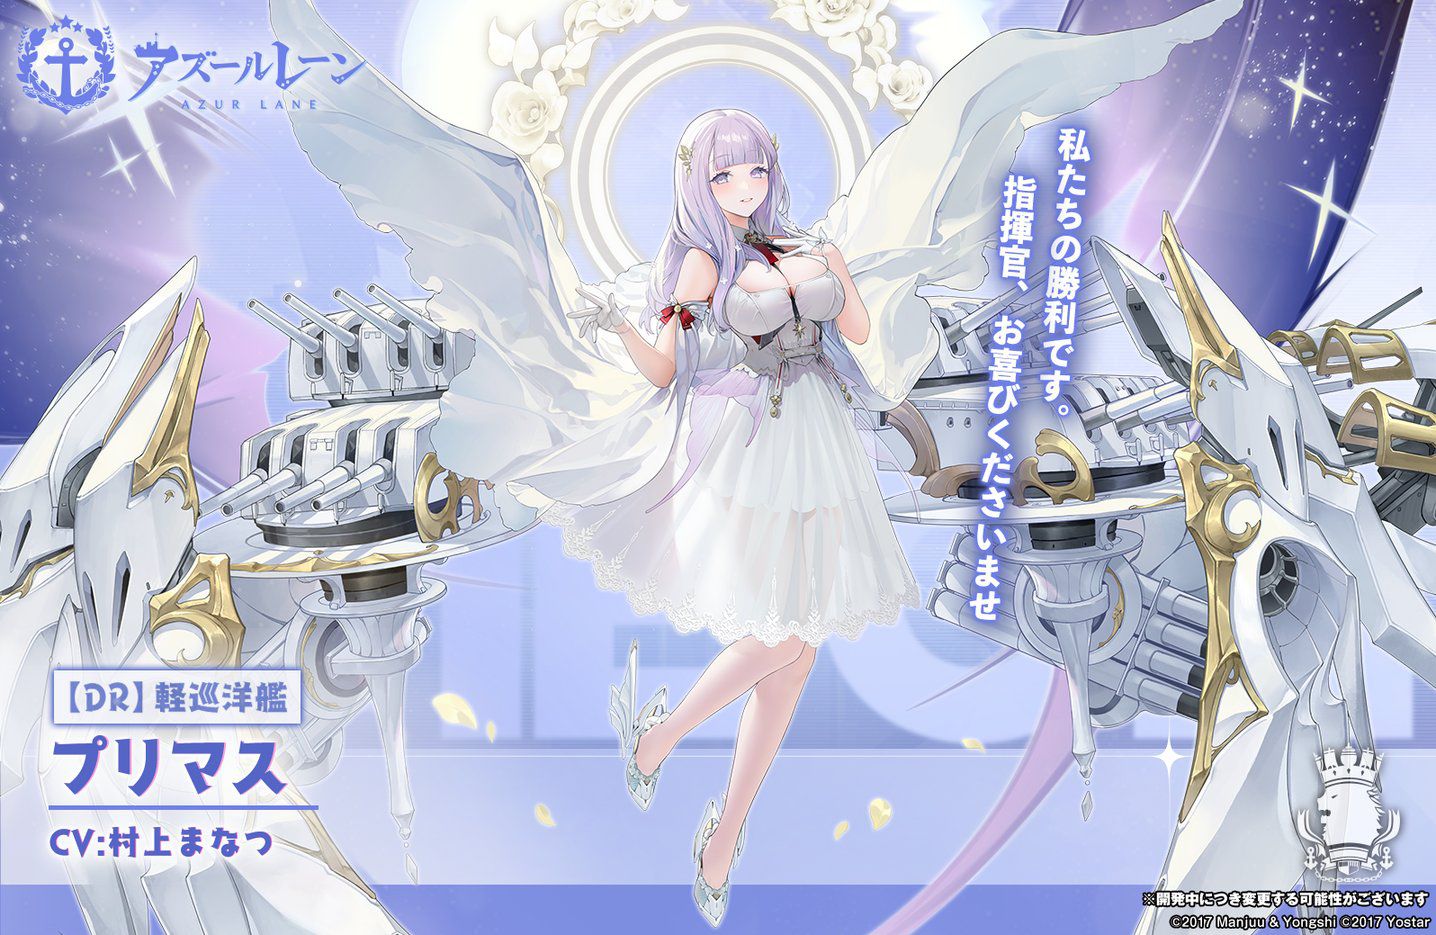 "Azure Lane" Erotic new character with outrageous erotic chimuchi boobs and super high leg dos kebe clothes 3